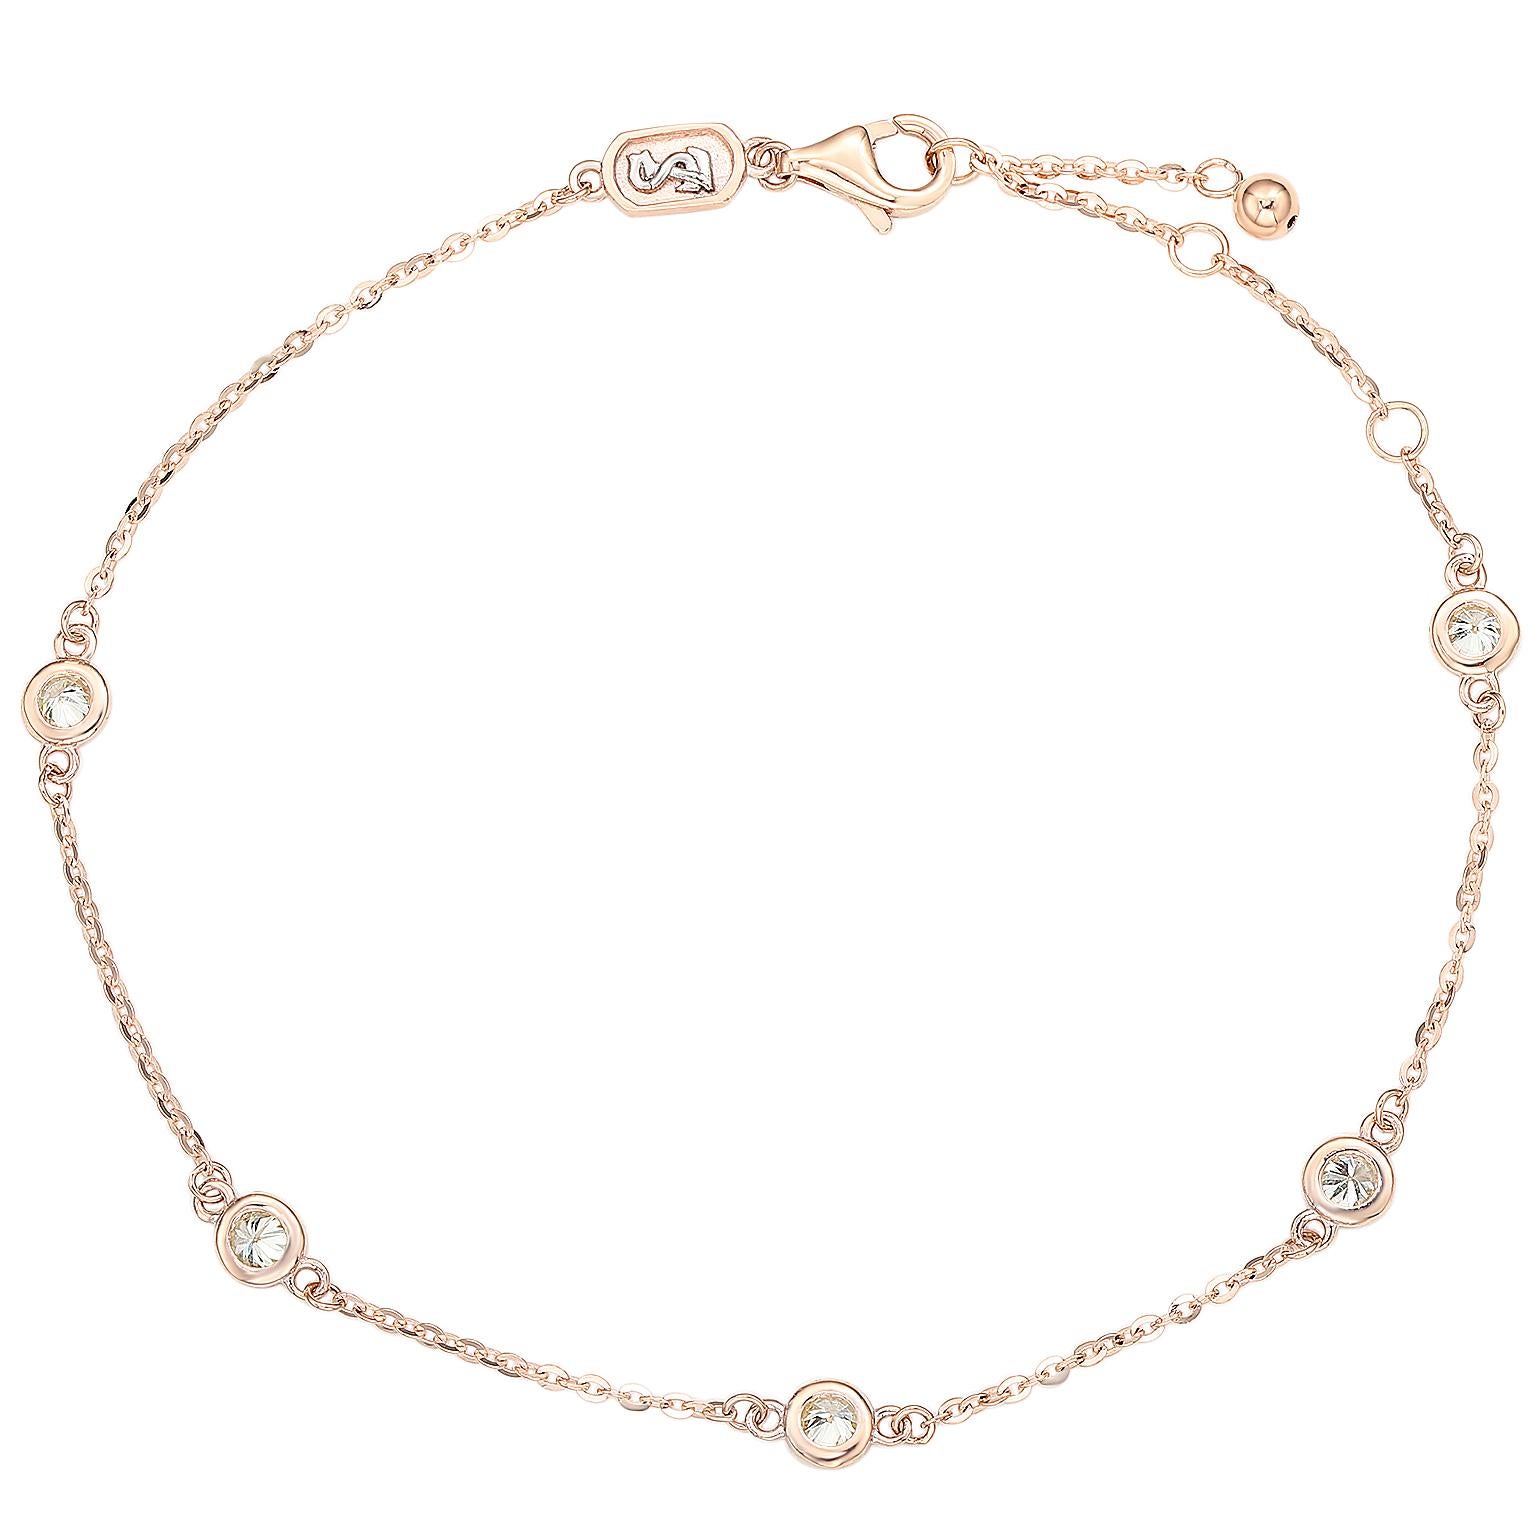 Add some sparkle to your wrist with this beautiful diamond station bracelet by Suzy Levian. This magnificent bracelet boasts 5 brilliant round-cut diamonds in an exquisite bezel adorned of 14-karat rose gold. This bracelet features a high polish